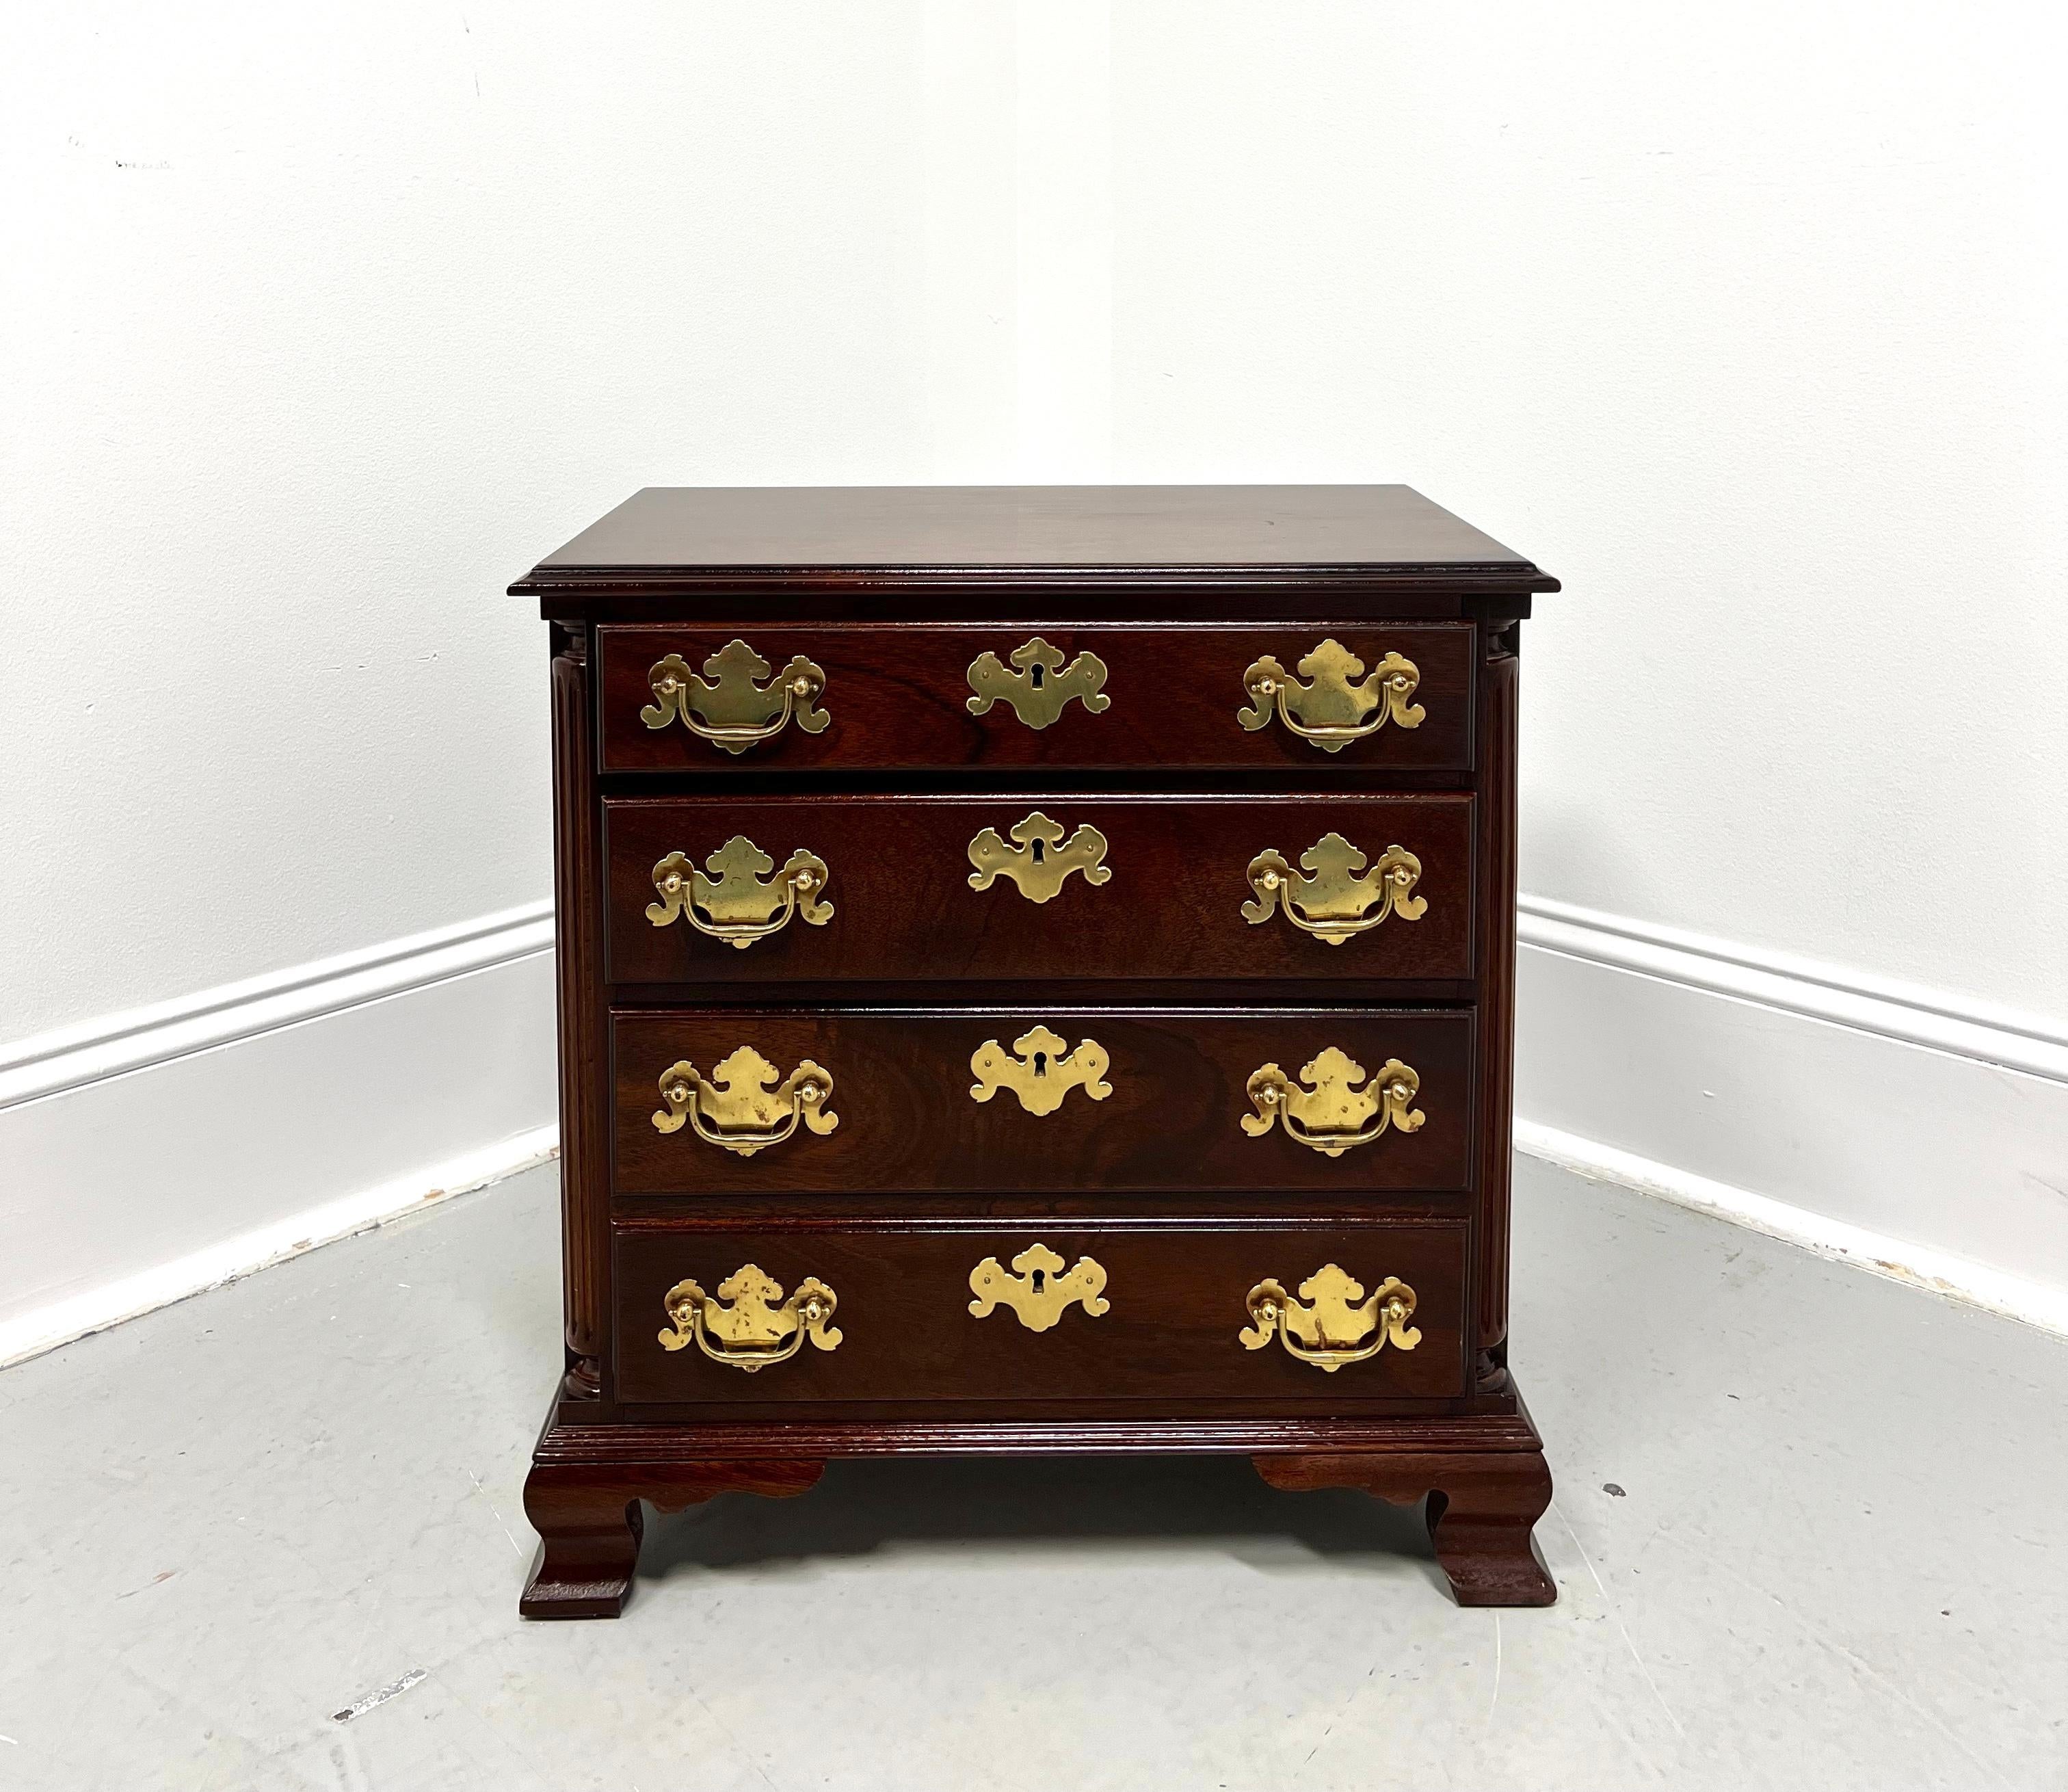 A Chippendale style chairside chest, unbranded, possibly by Madison Square or similar. Mahogany with brass hardware, ogee edge to the top, fluted columns to the front sides, fully finished on all sides, and ogee bracket feet. Features three drawers